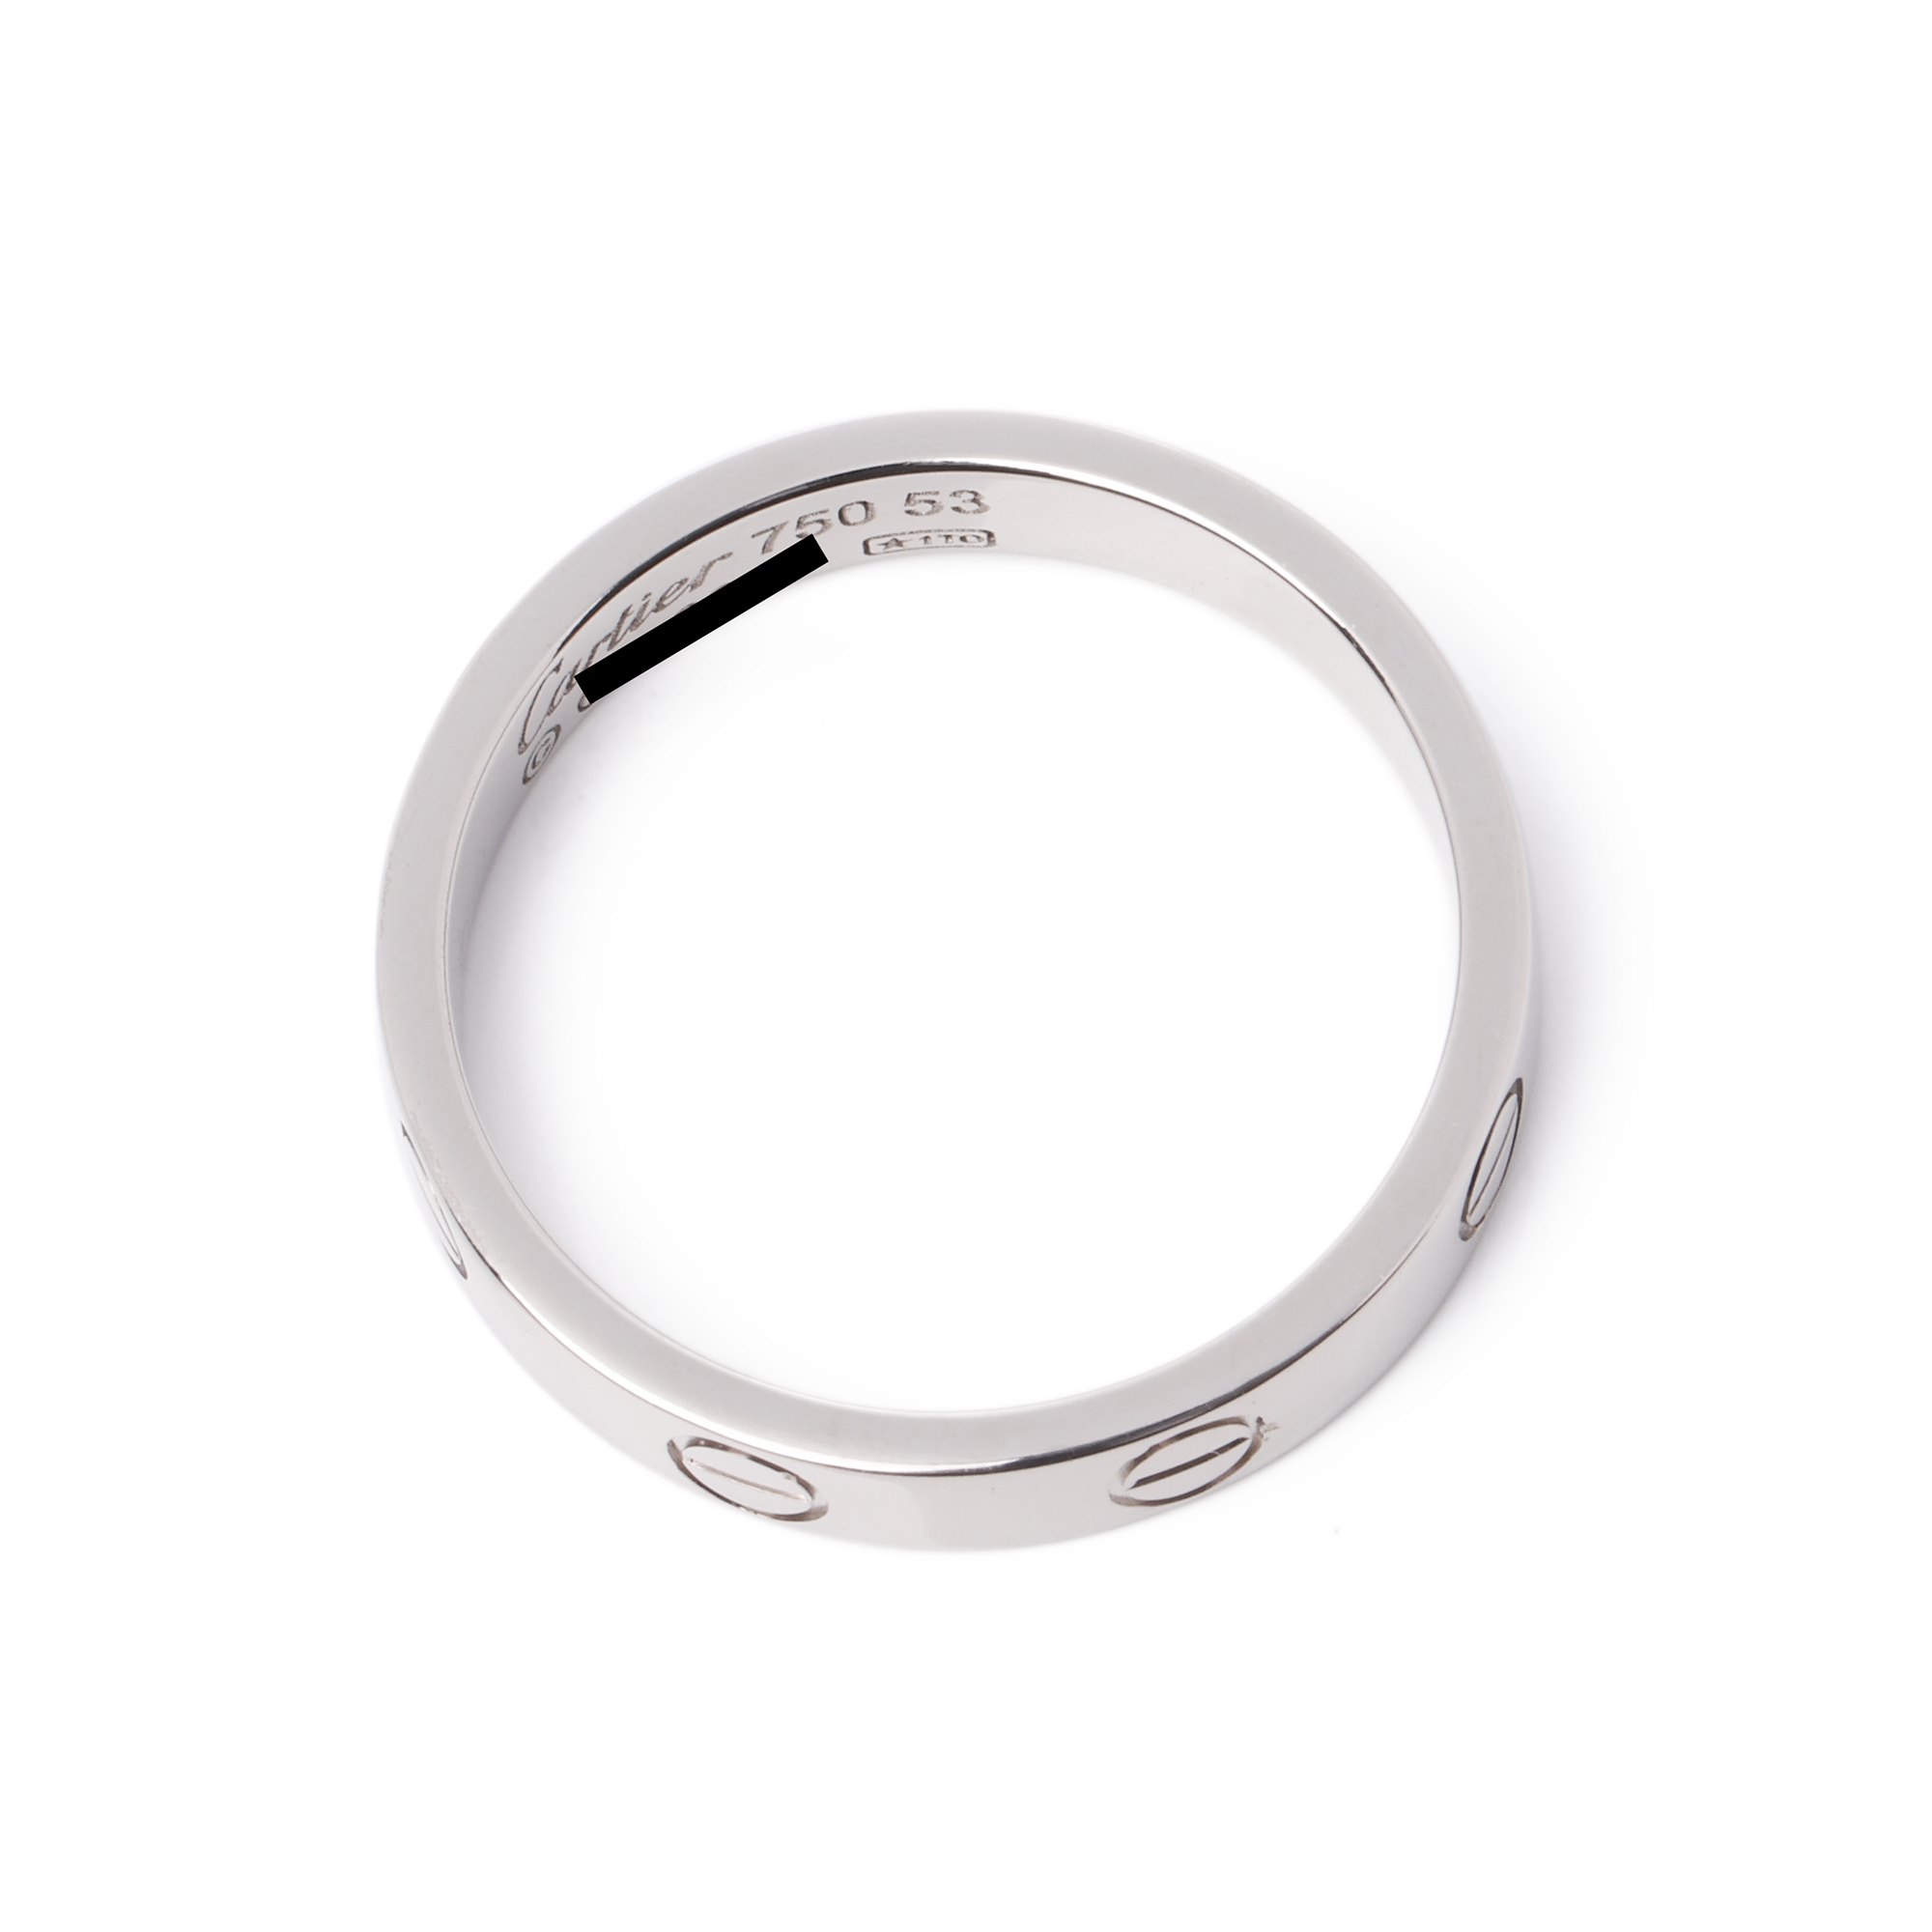 Cartier Love White Gold Wedding Band Ring